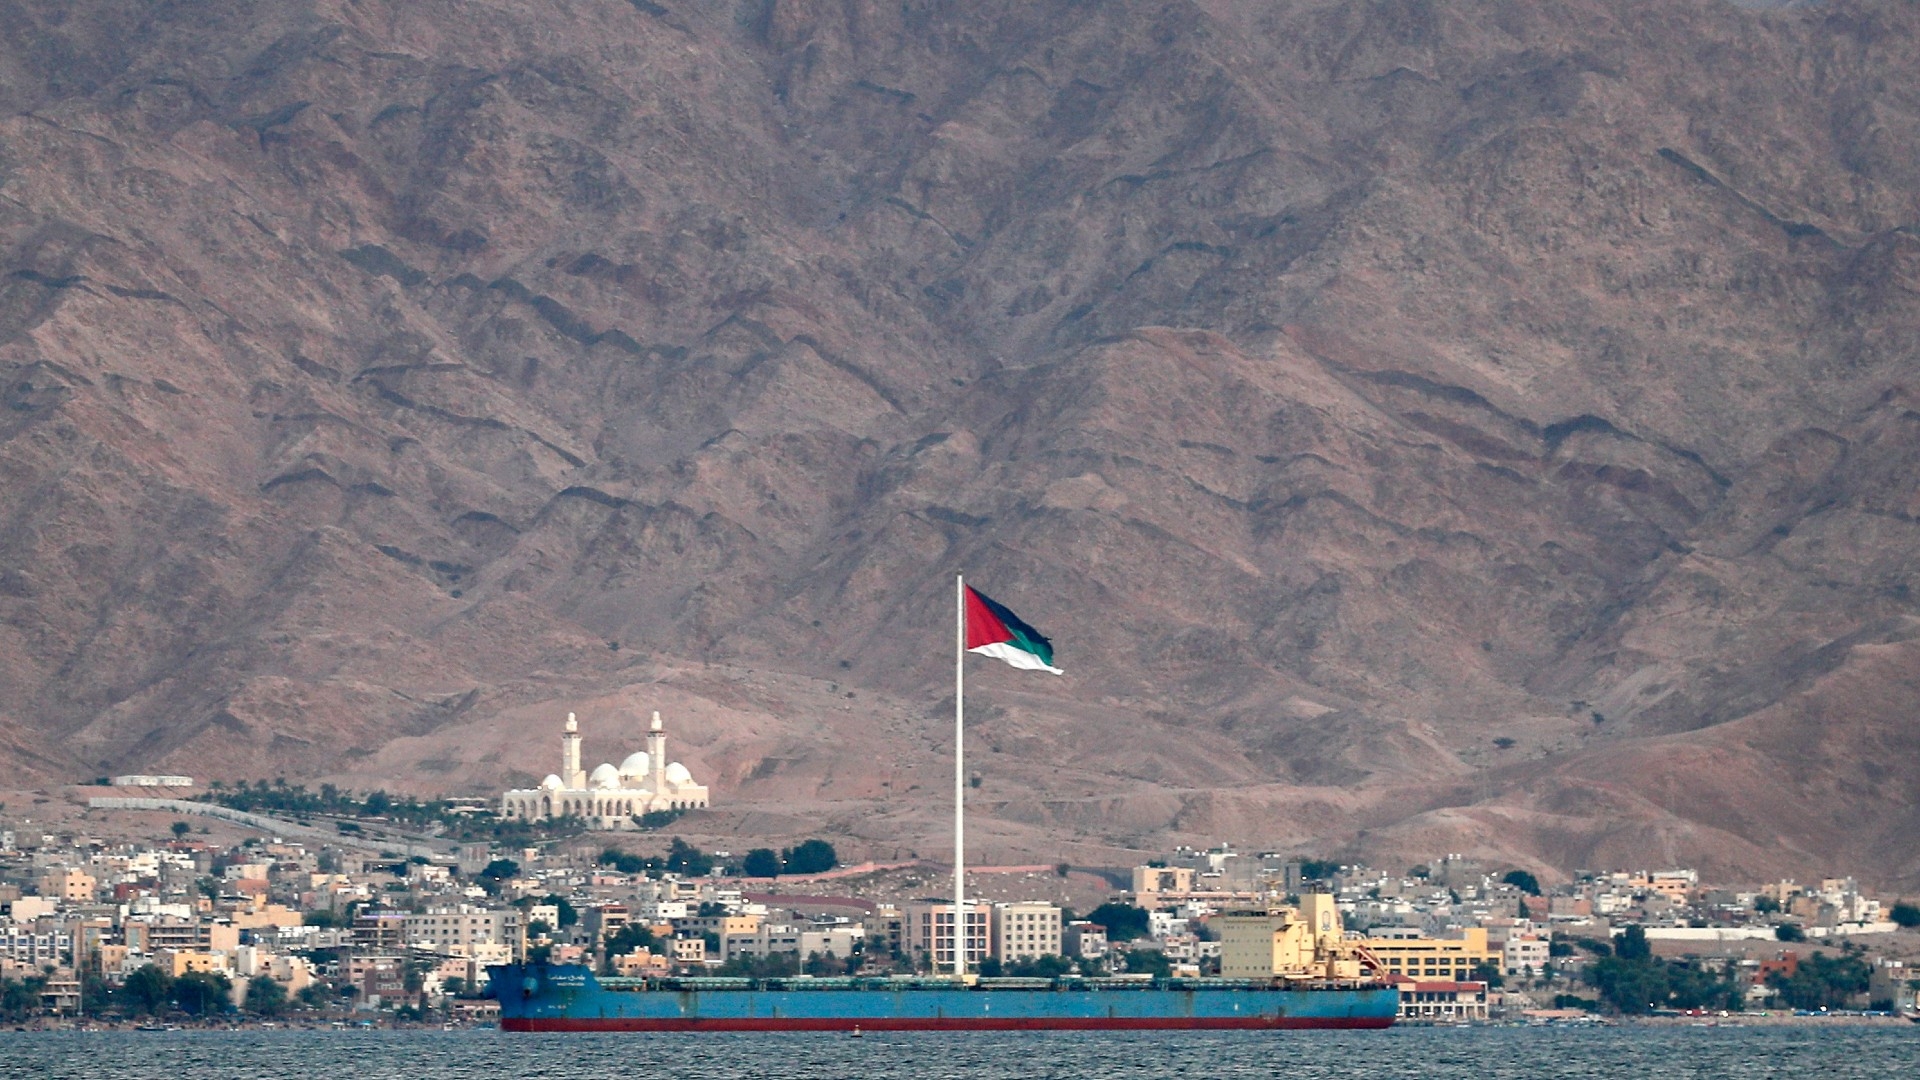 A view of the Flag of the Arab Revolt flying in Jordan's coastal city of Aqaba, where talks took place between Israeli and Palestinian officials (AFP/File photo)